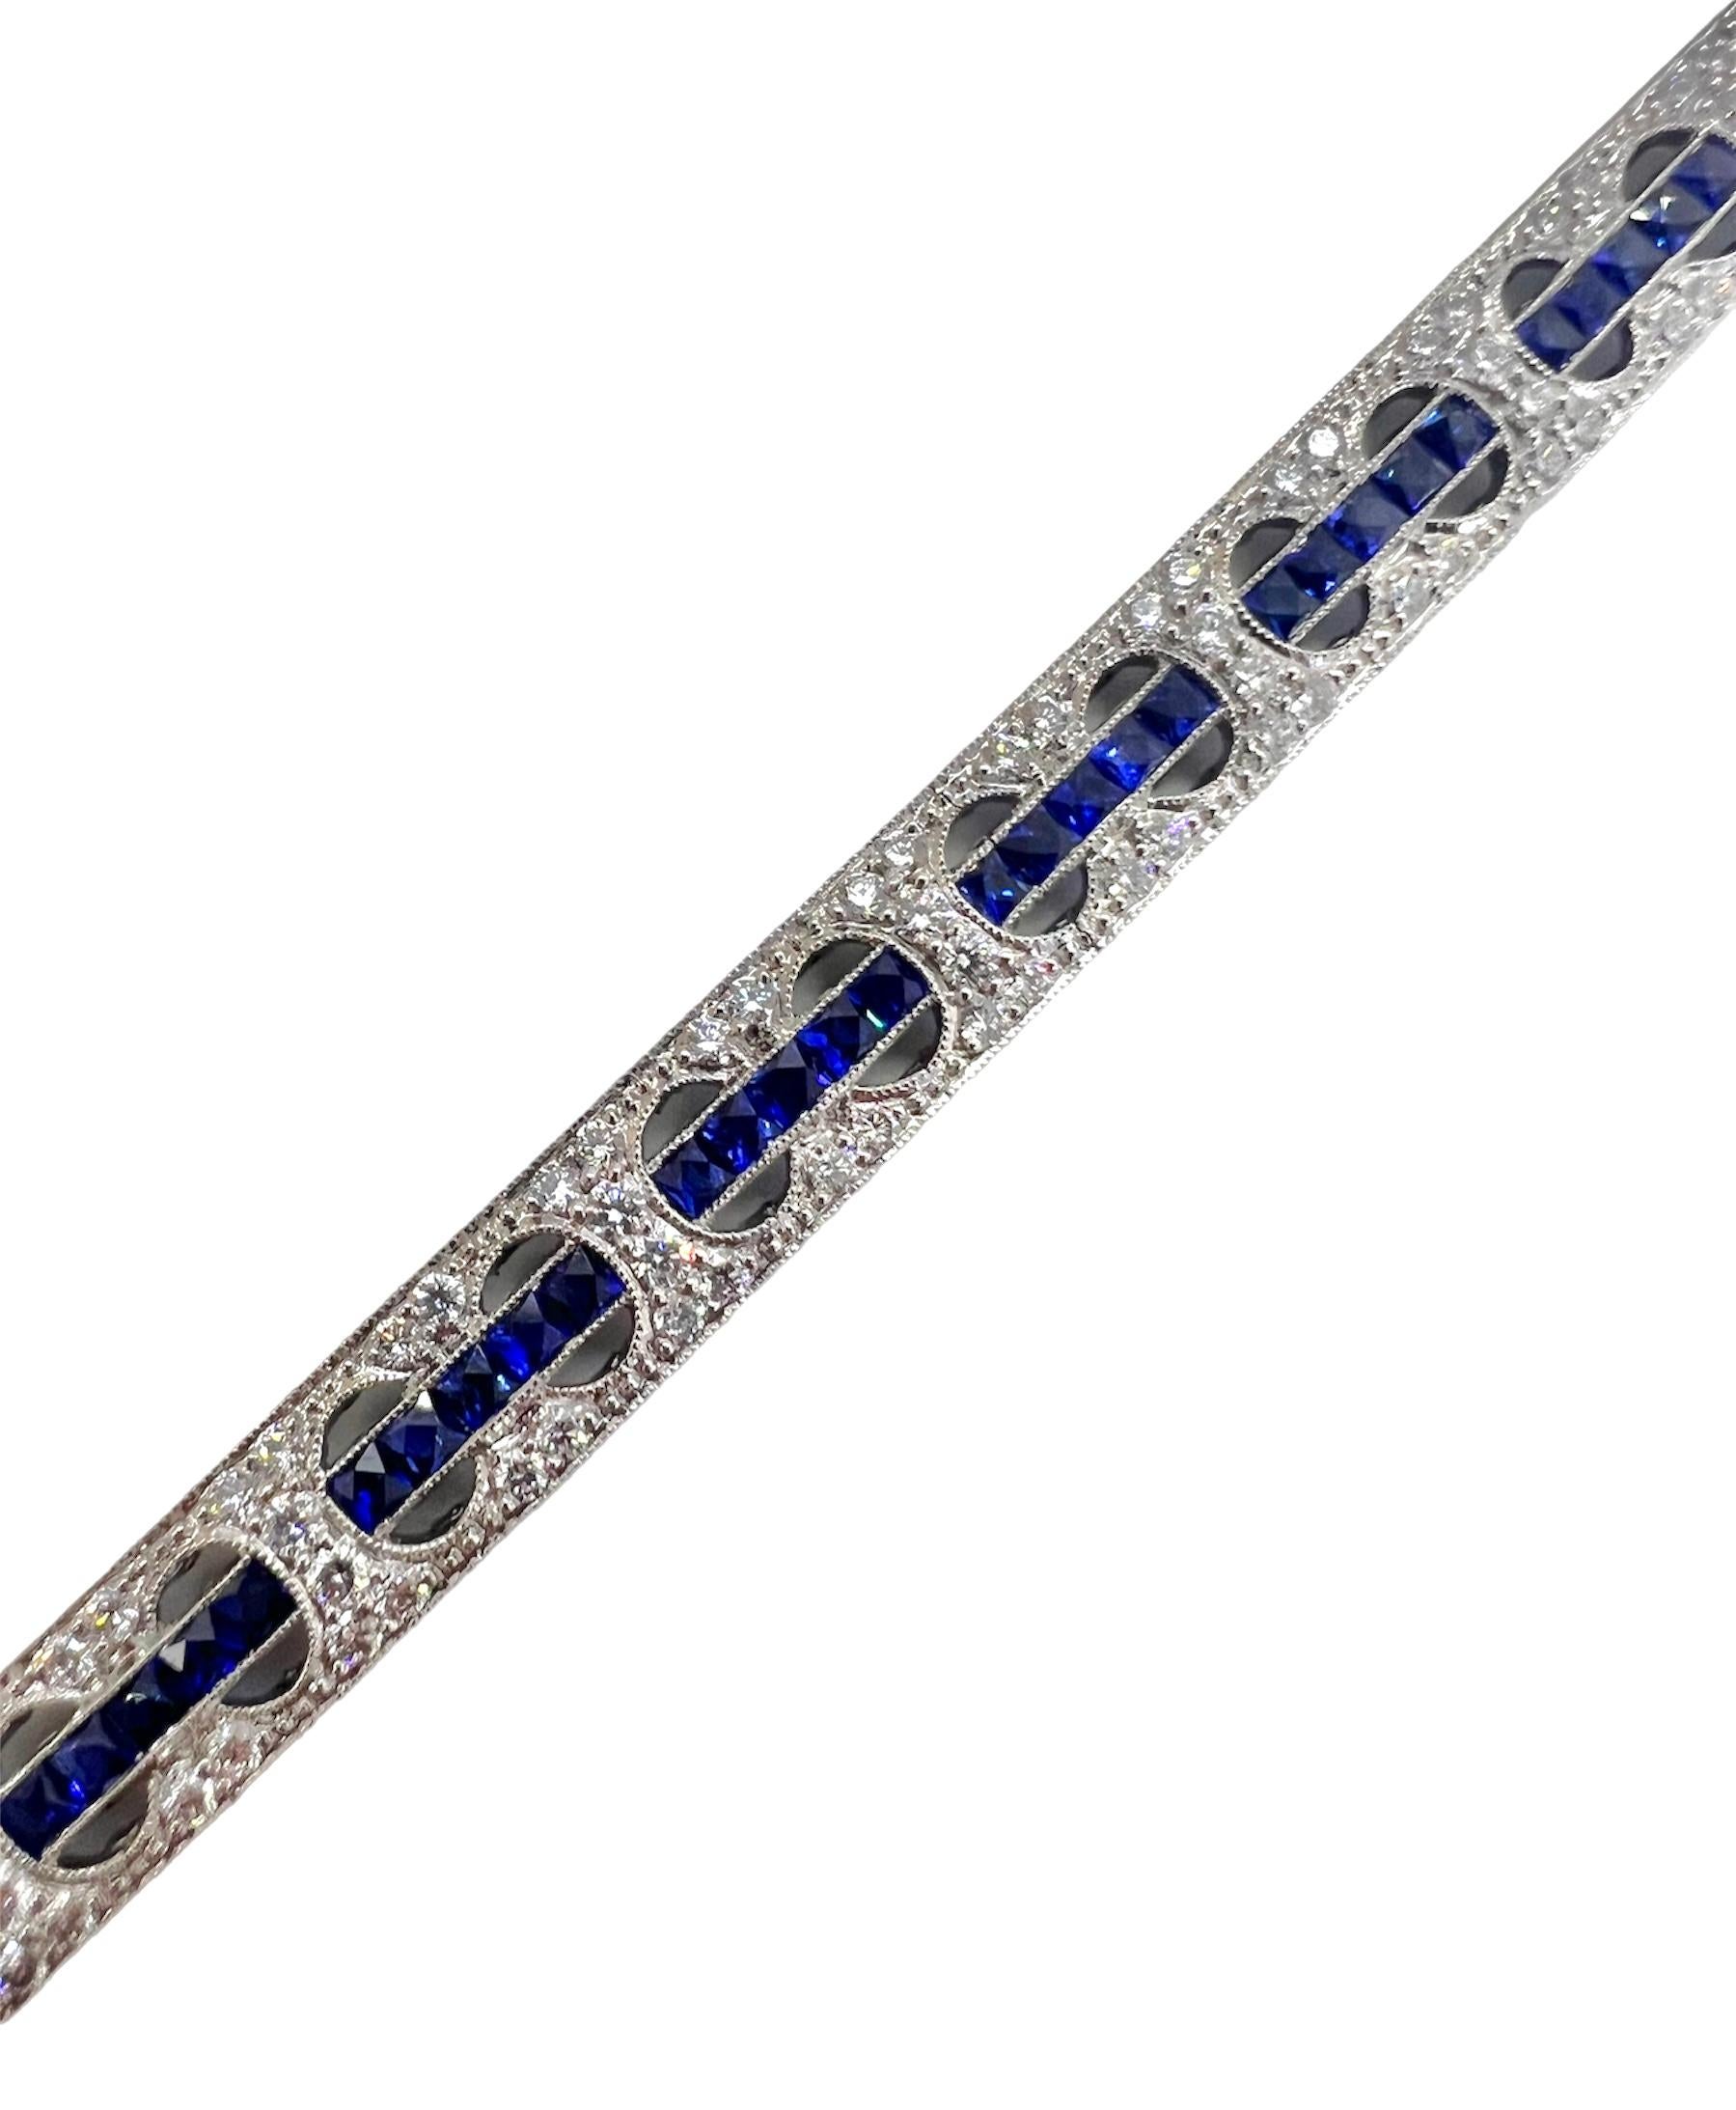 Sophia D. Art Deco inspired bracelet with 2.19 carat diamond and 5.60 carat blue sapphire in platinum setting. 

Sophia D by Joseph Dardashti LTD has been known worldwide for 35 years and are inspired by classic Art Deco design that merges with